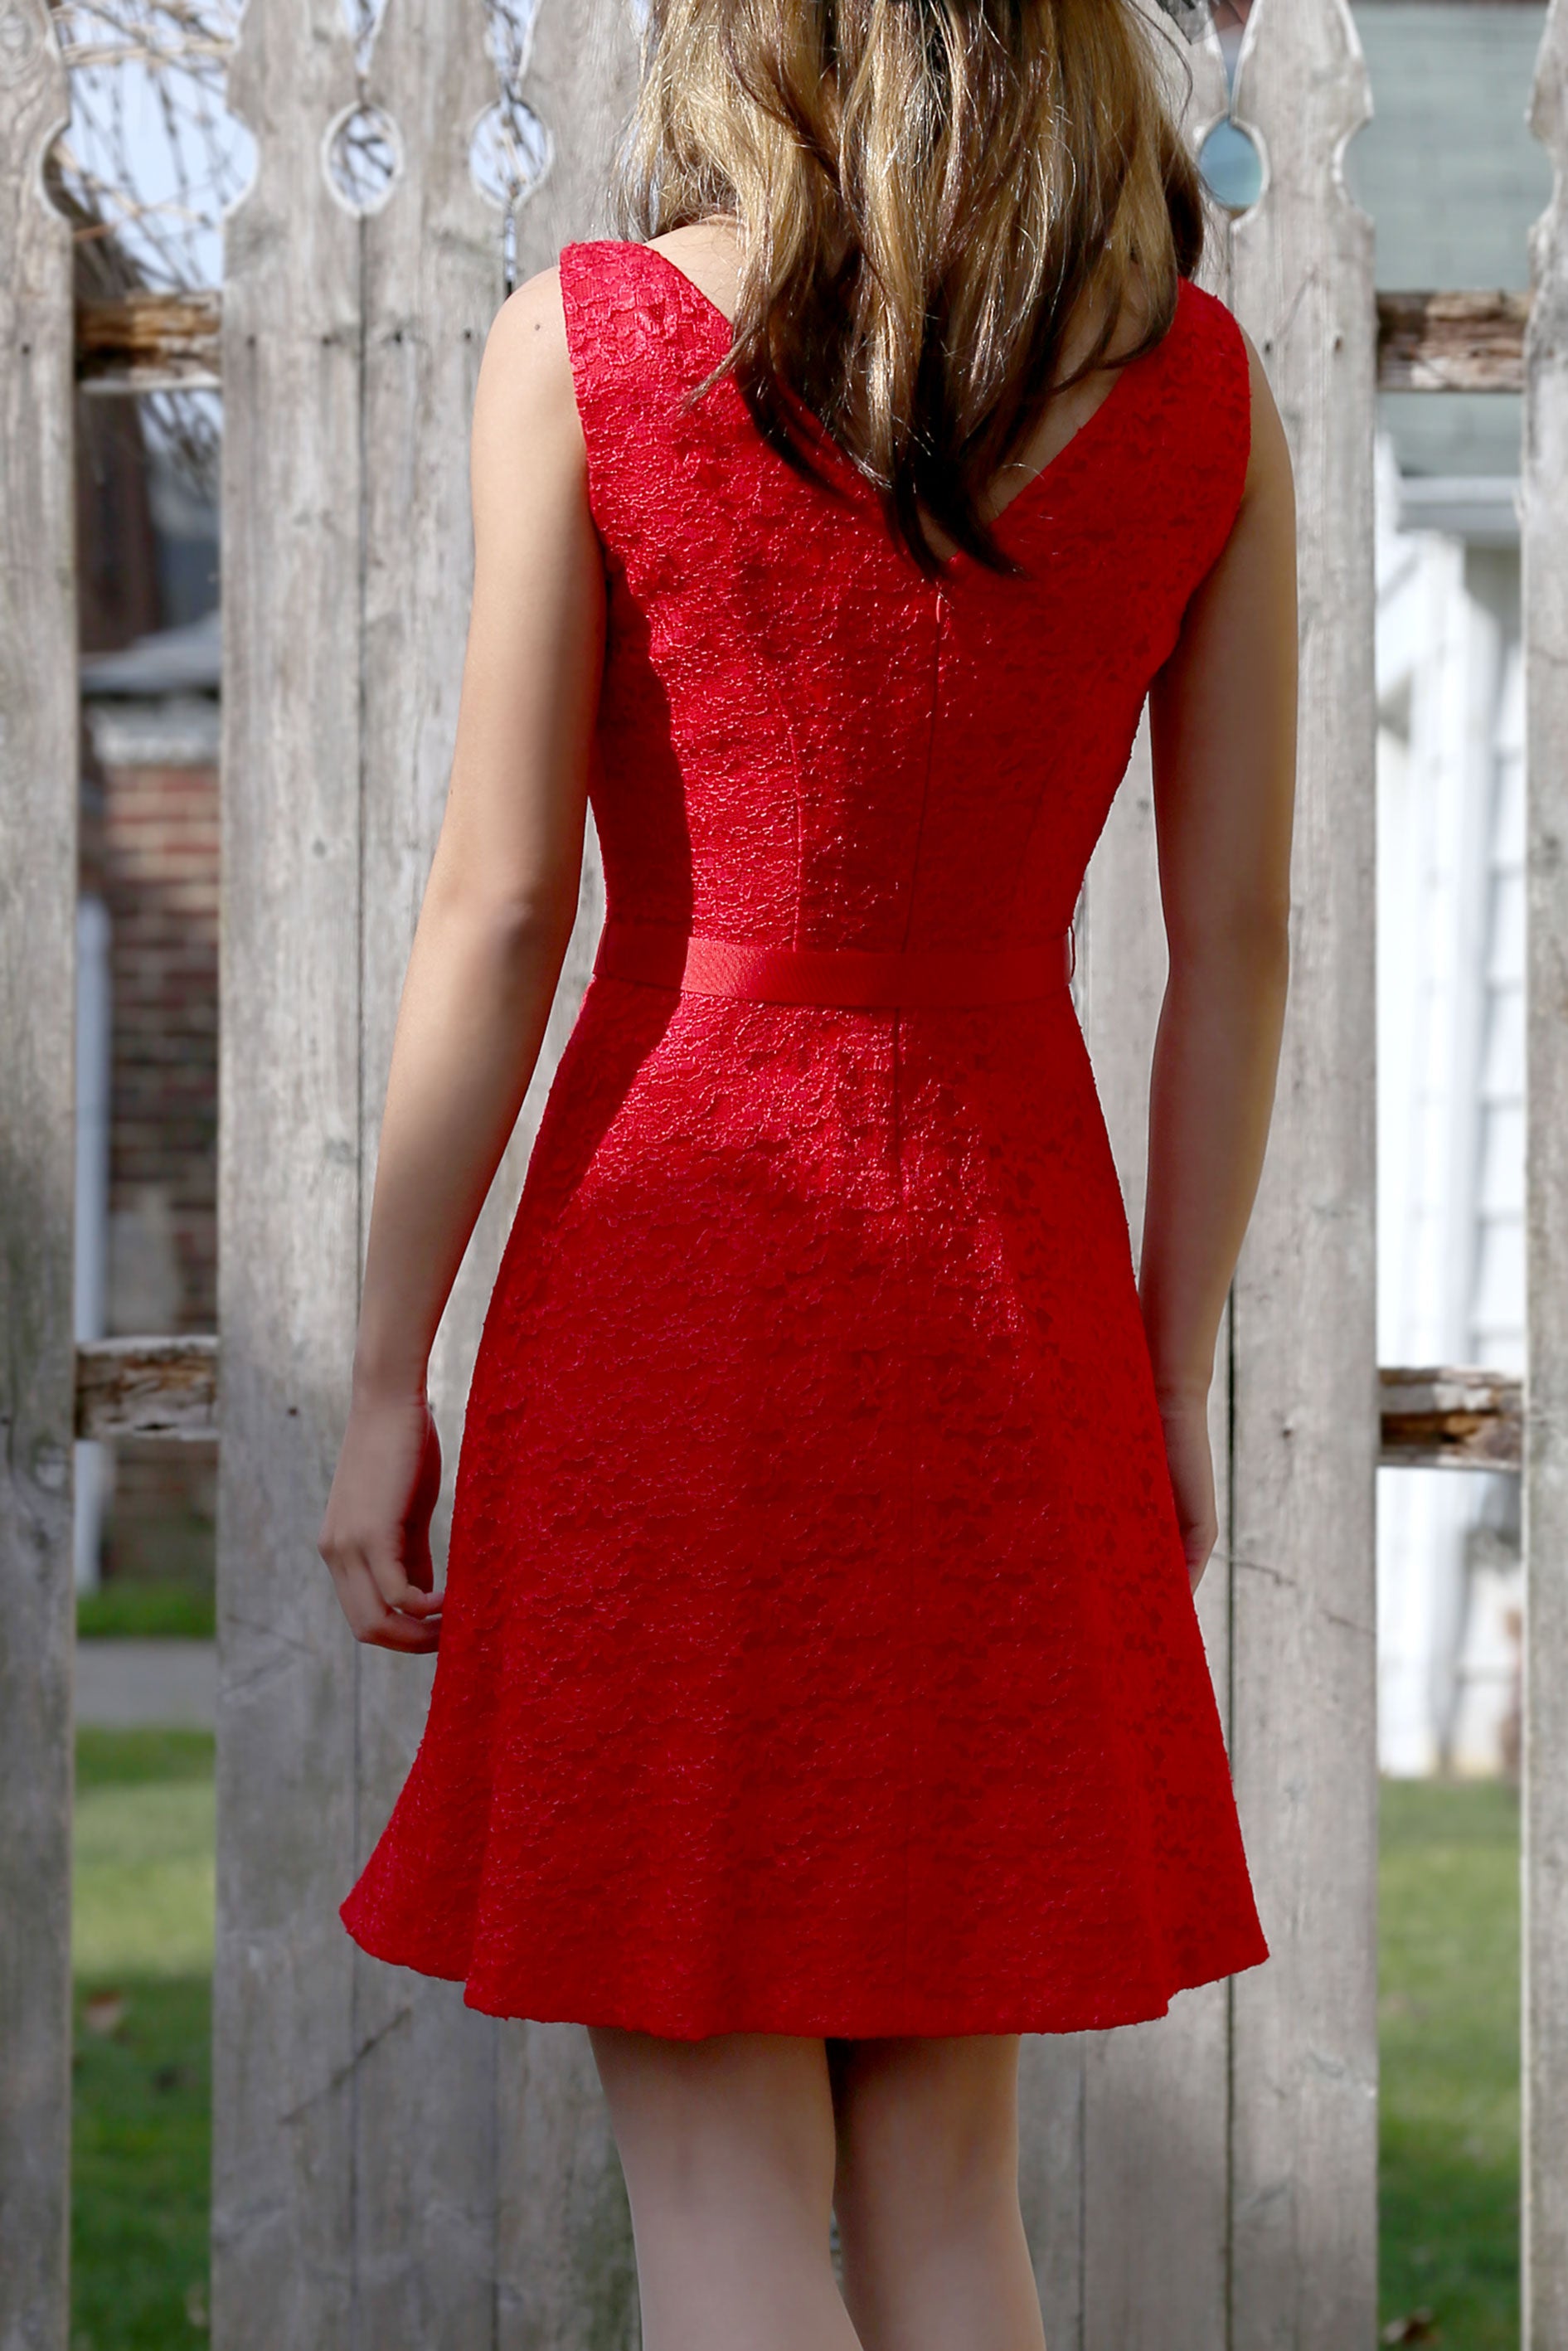 Classic Red Lace Dress with Perfect Fit - Tae With Jane NY